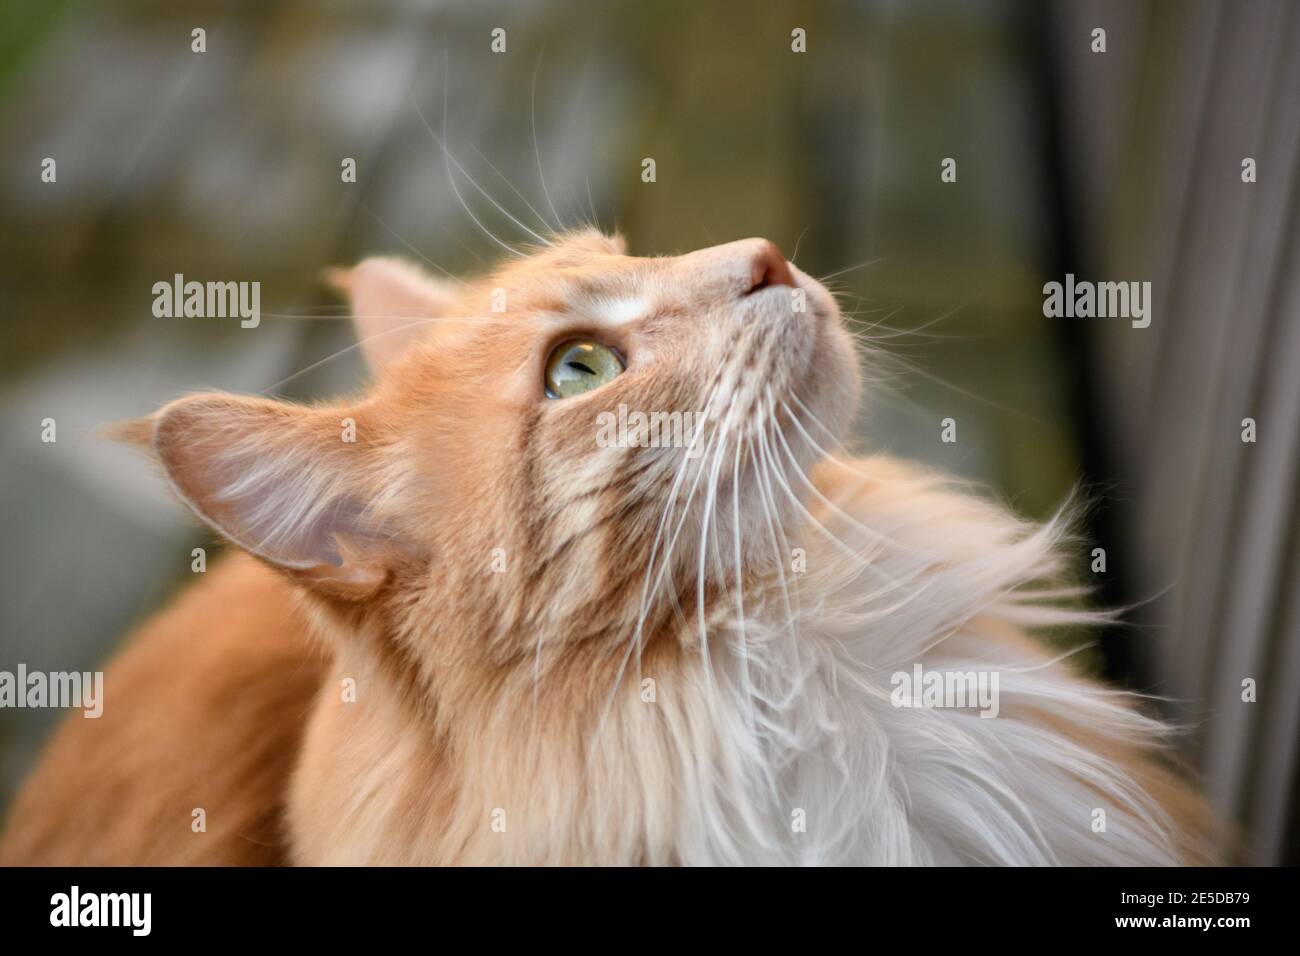 Portrait of a ginger Maine coon cat looking up Stock Photo